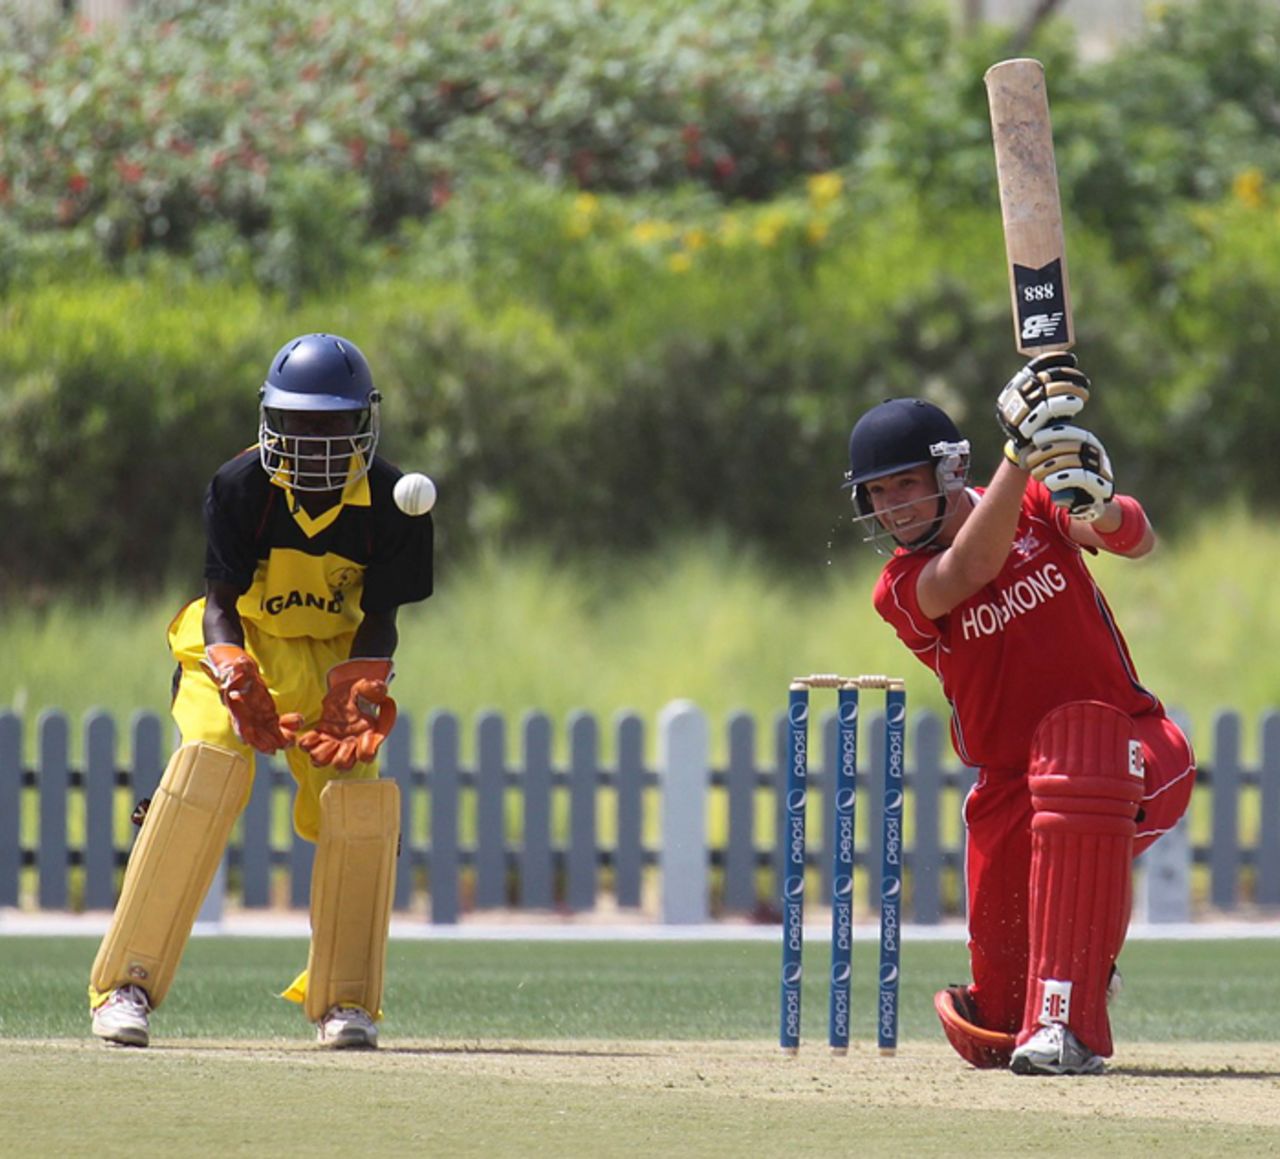 Courtney Krugers drives the ball against Uganda during the ICC World Cricket League Division 2 in Dubai on 8th April 2011